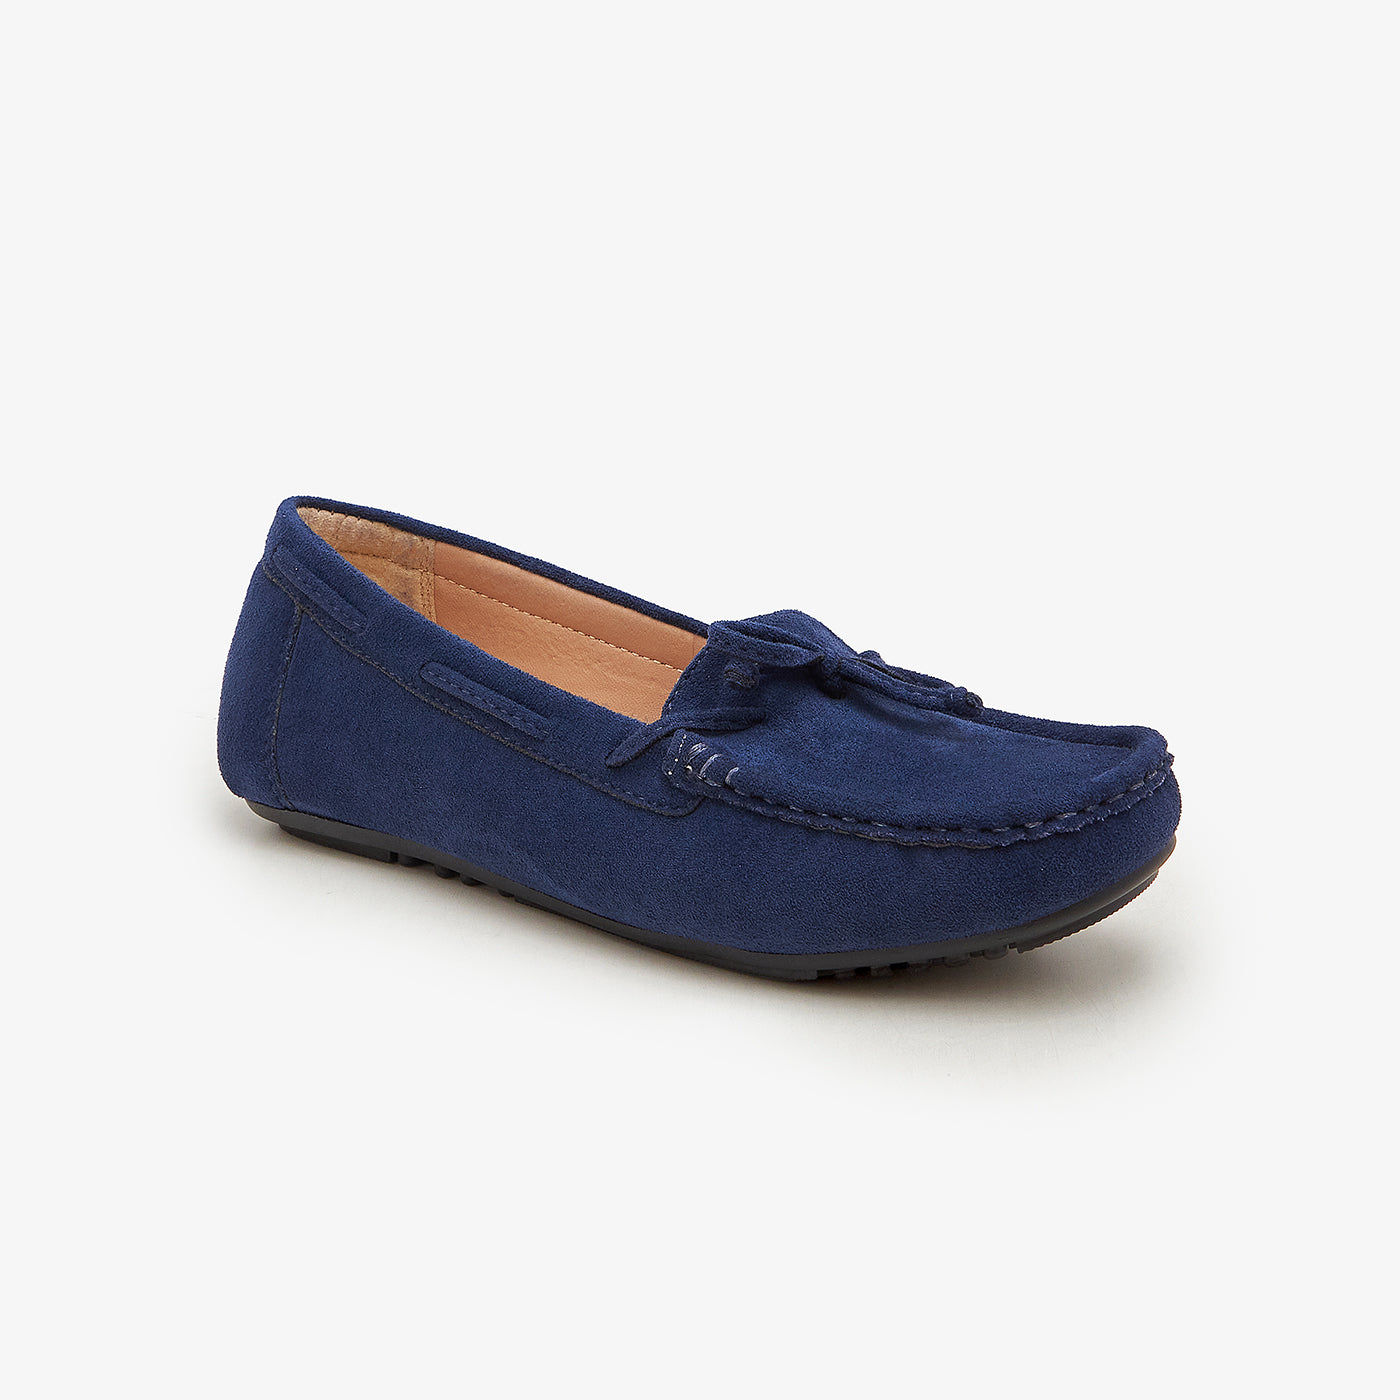 Suede Women's Loafers